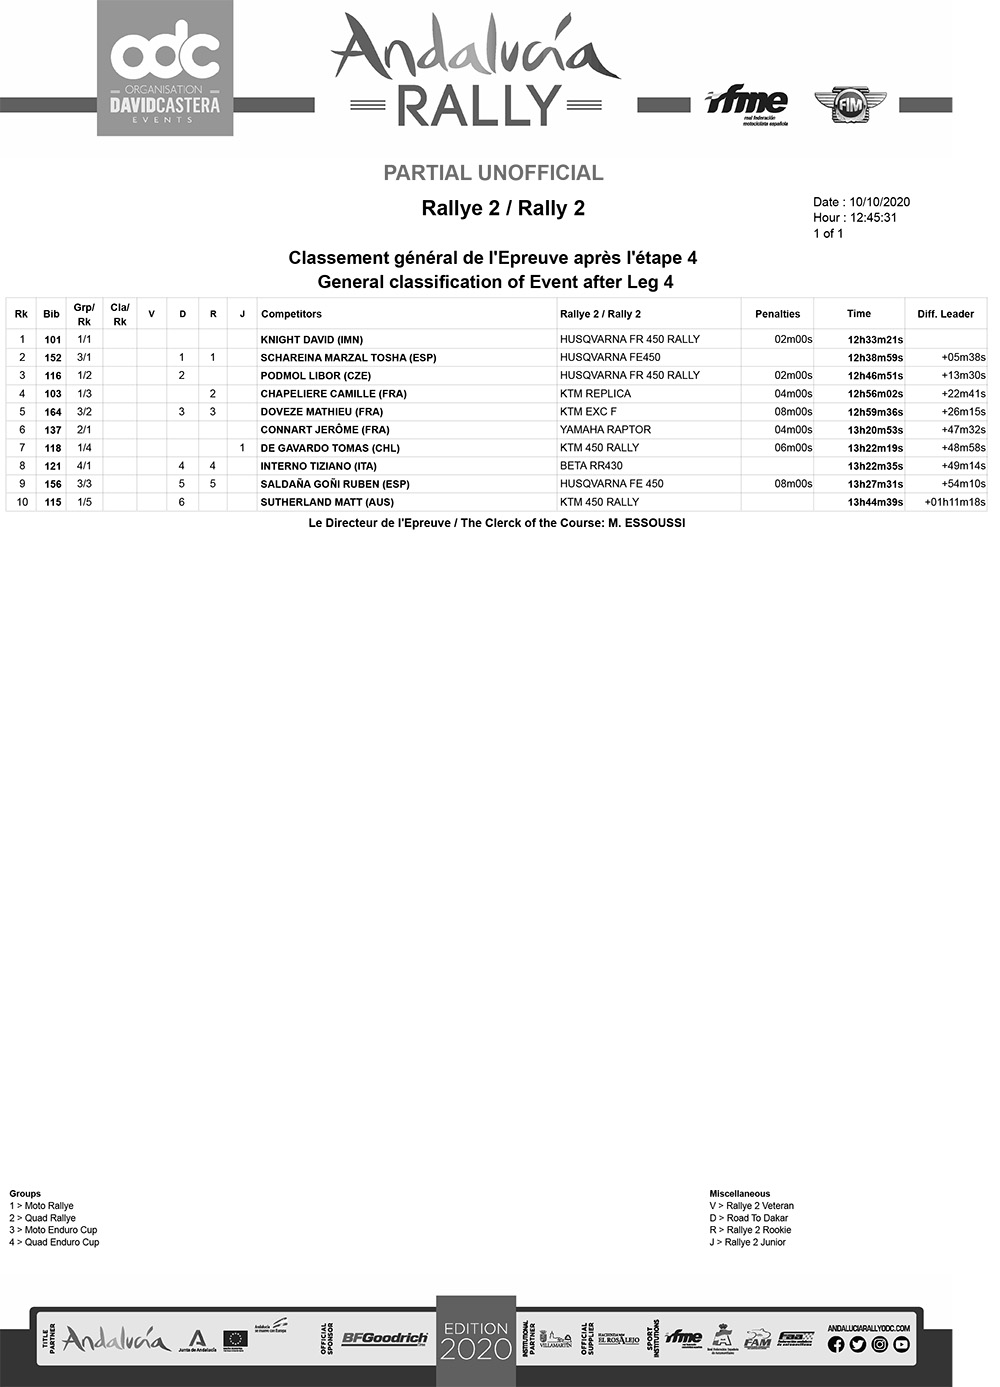 classification-after-leg-4-rally2